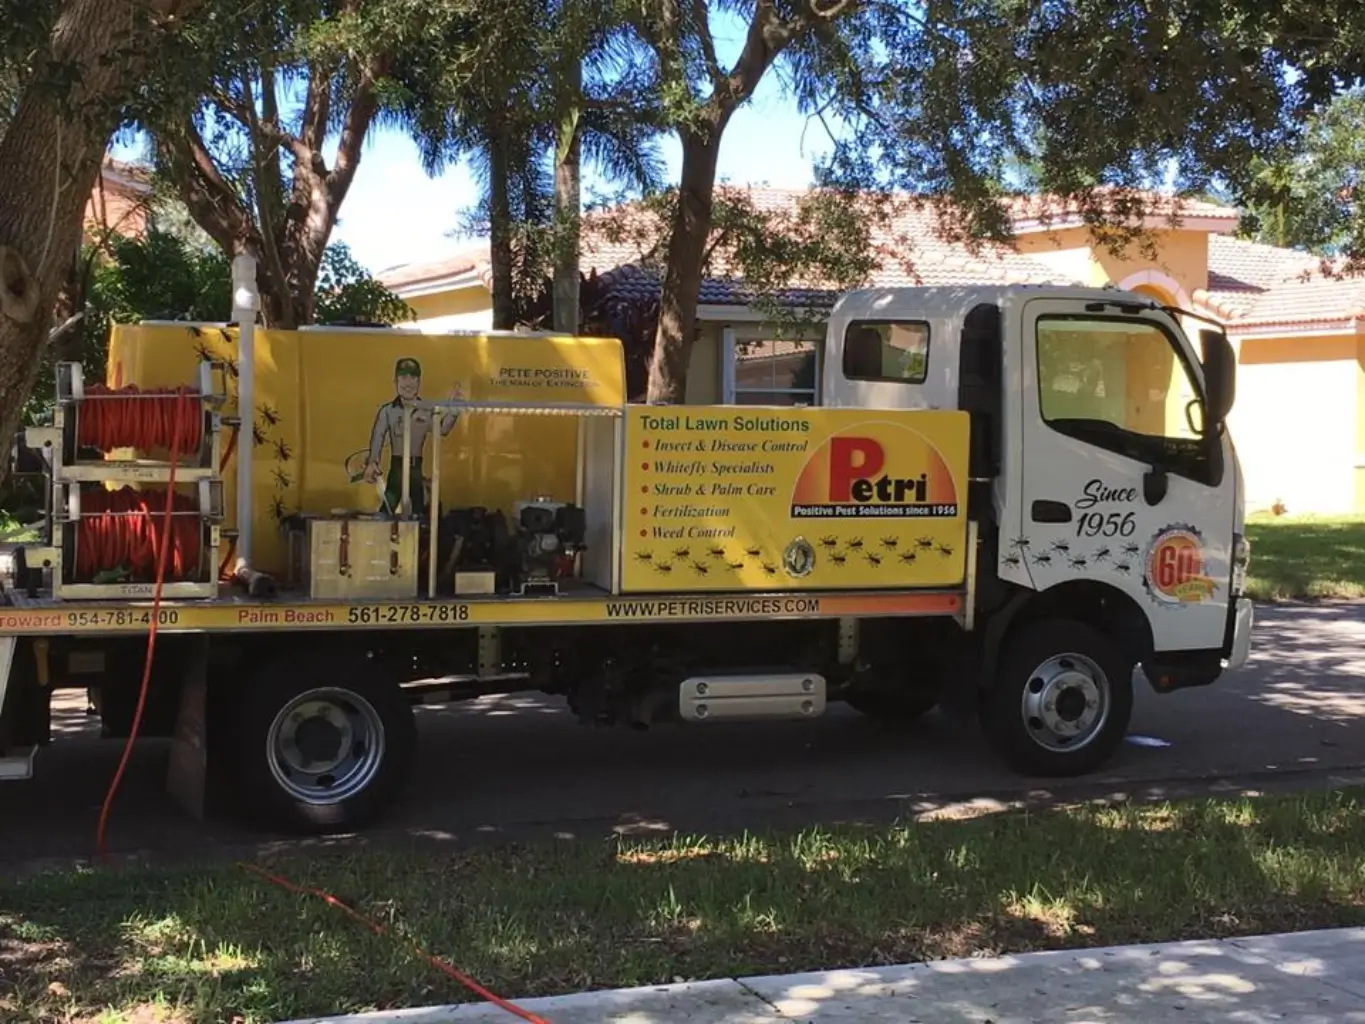 Lawn and shrub care services by Petri Pest Control in South Florida